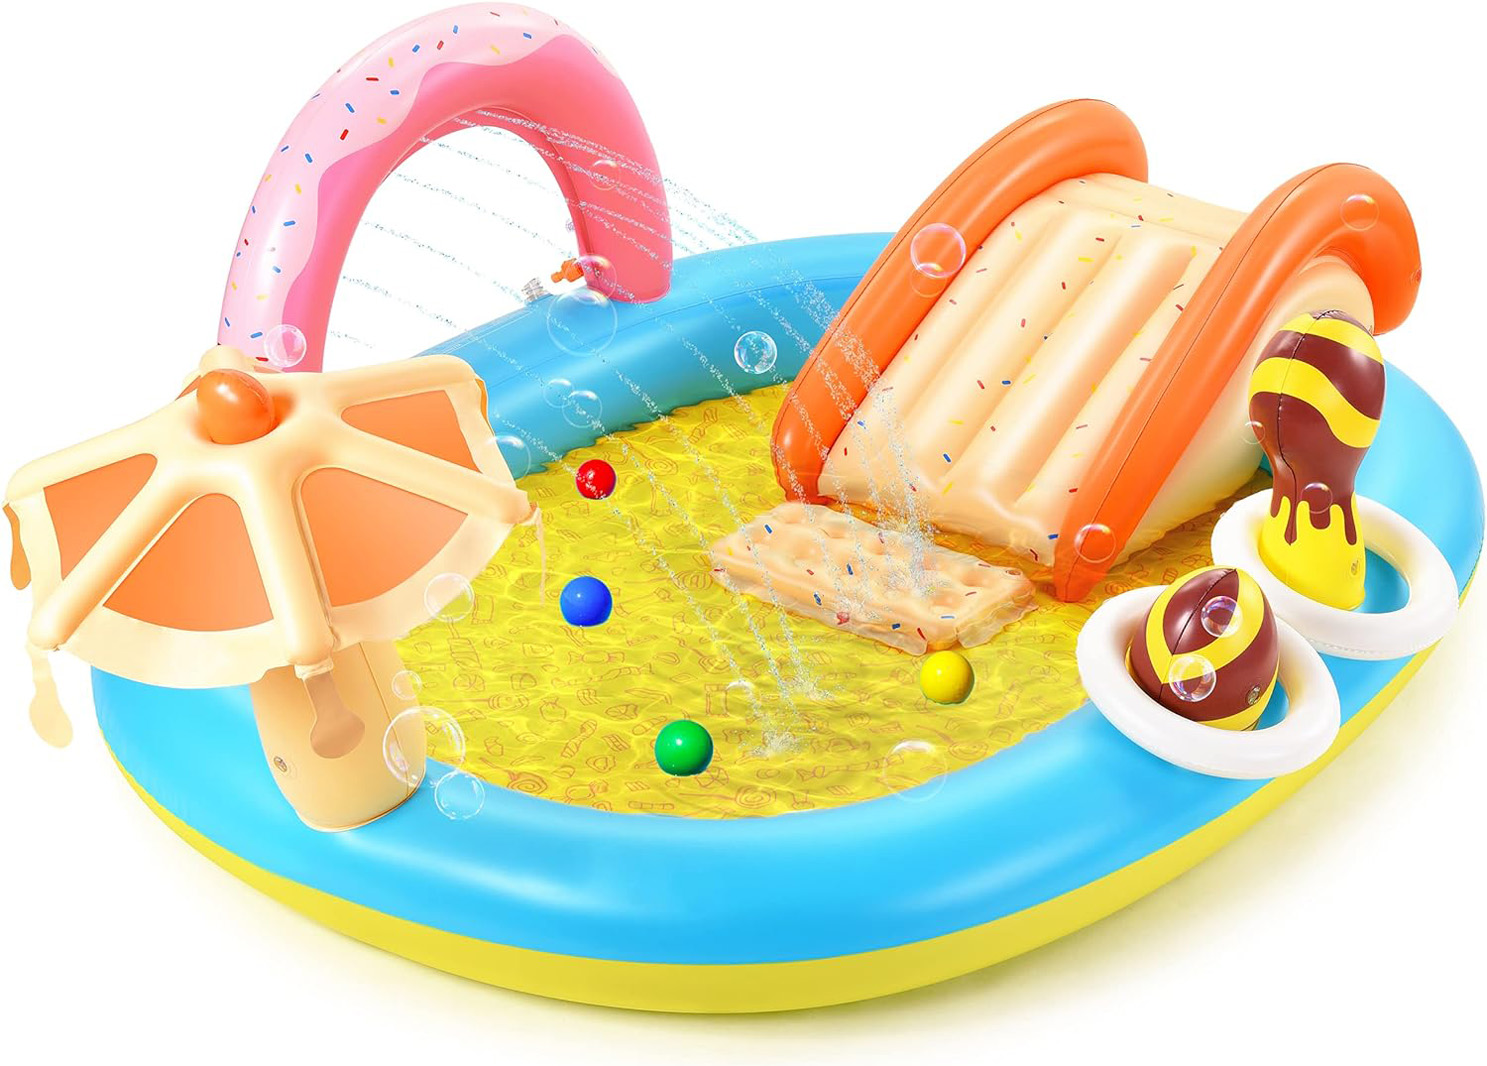 Hesung Inflatable Play Center, 98” x 67” x 32” Kids Pool with Slide for Garden, Backyard Water Park